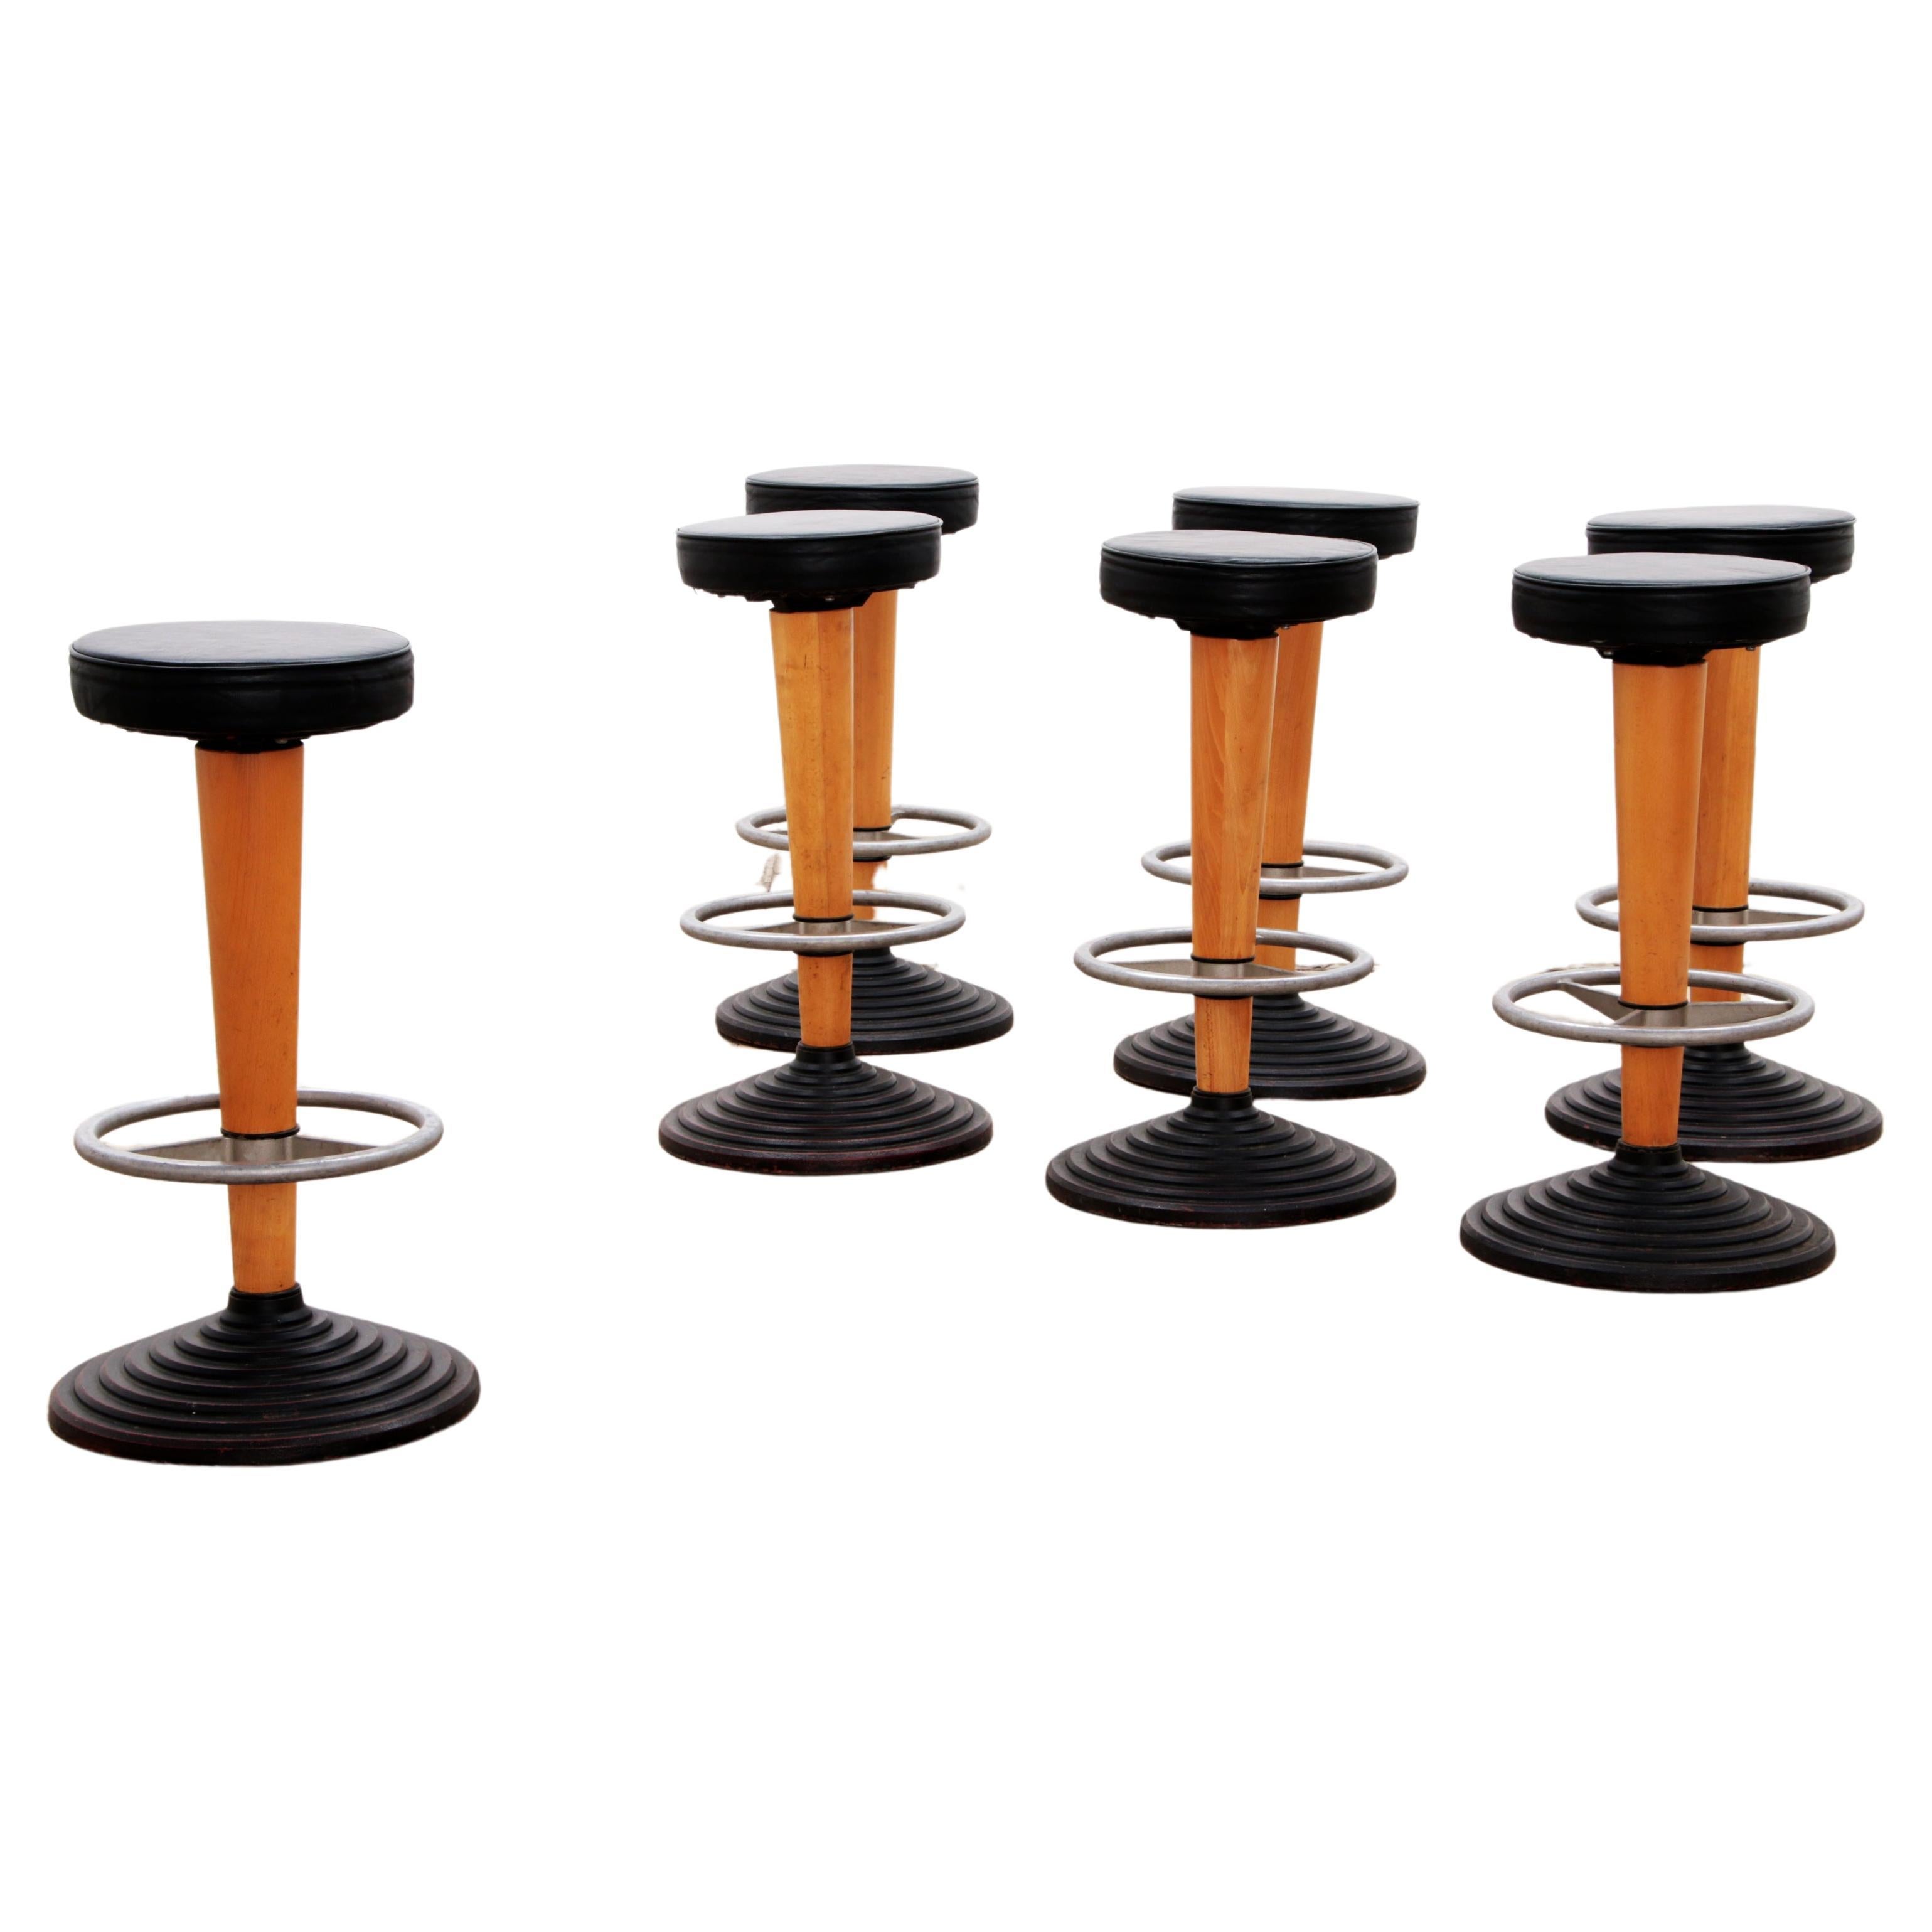 1960s Bar Stool with Cast Iron Base and Leather Seat, set with 7 bar stools. For Sale